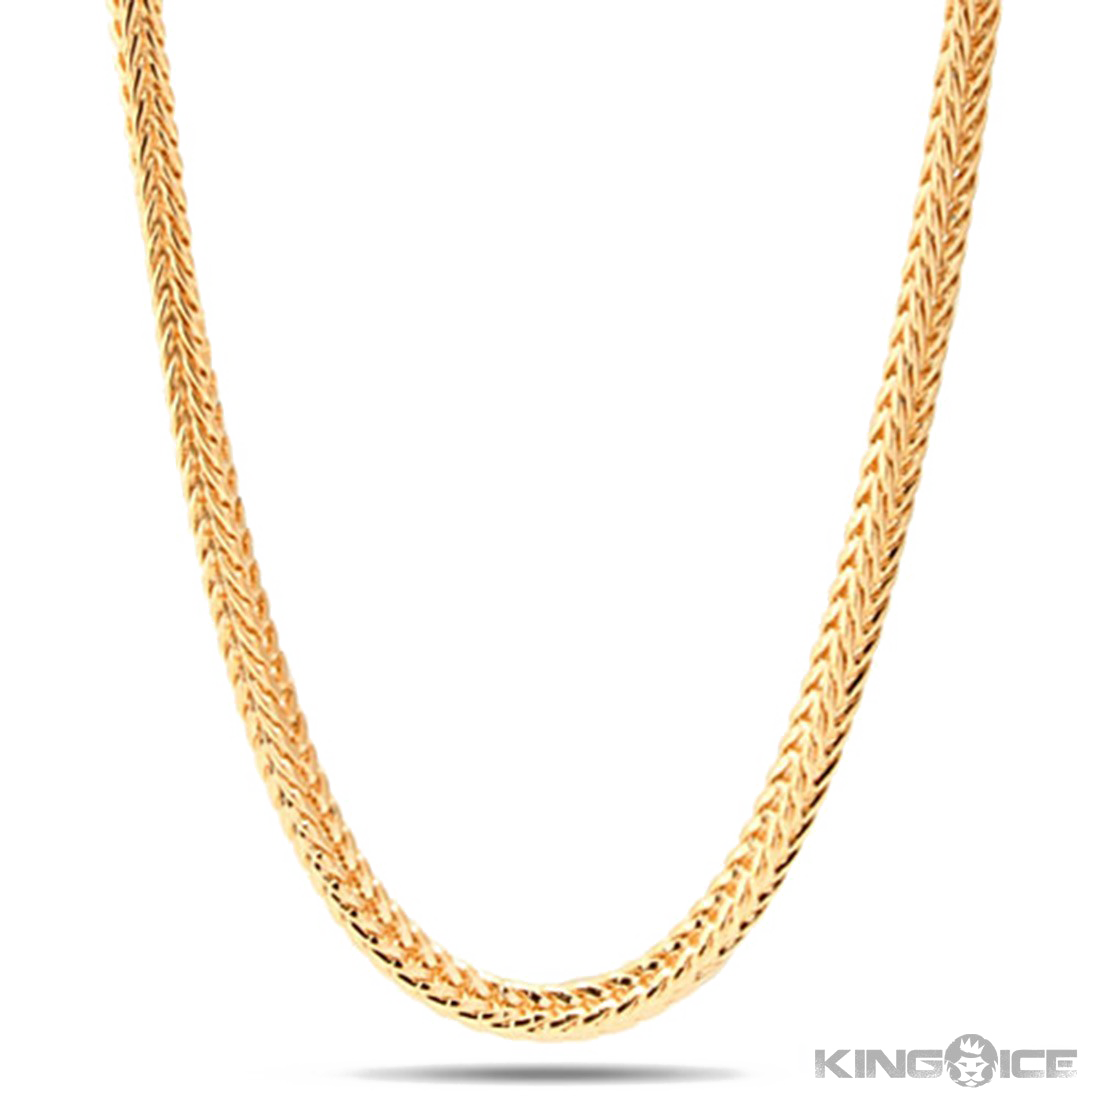 Gold Chain Free PNG Image